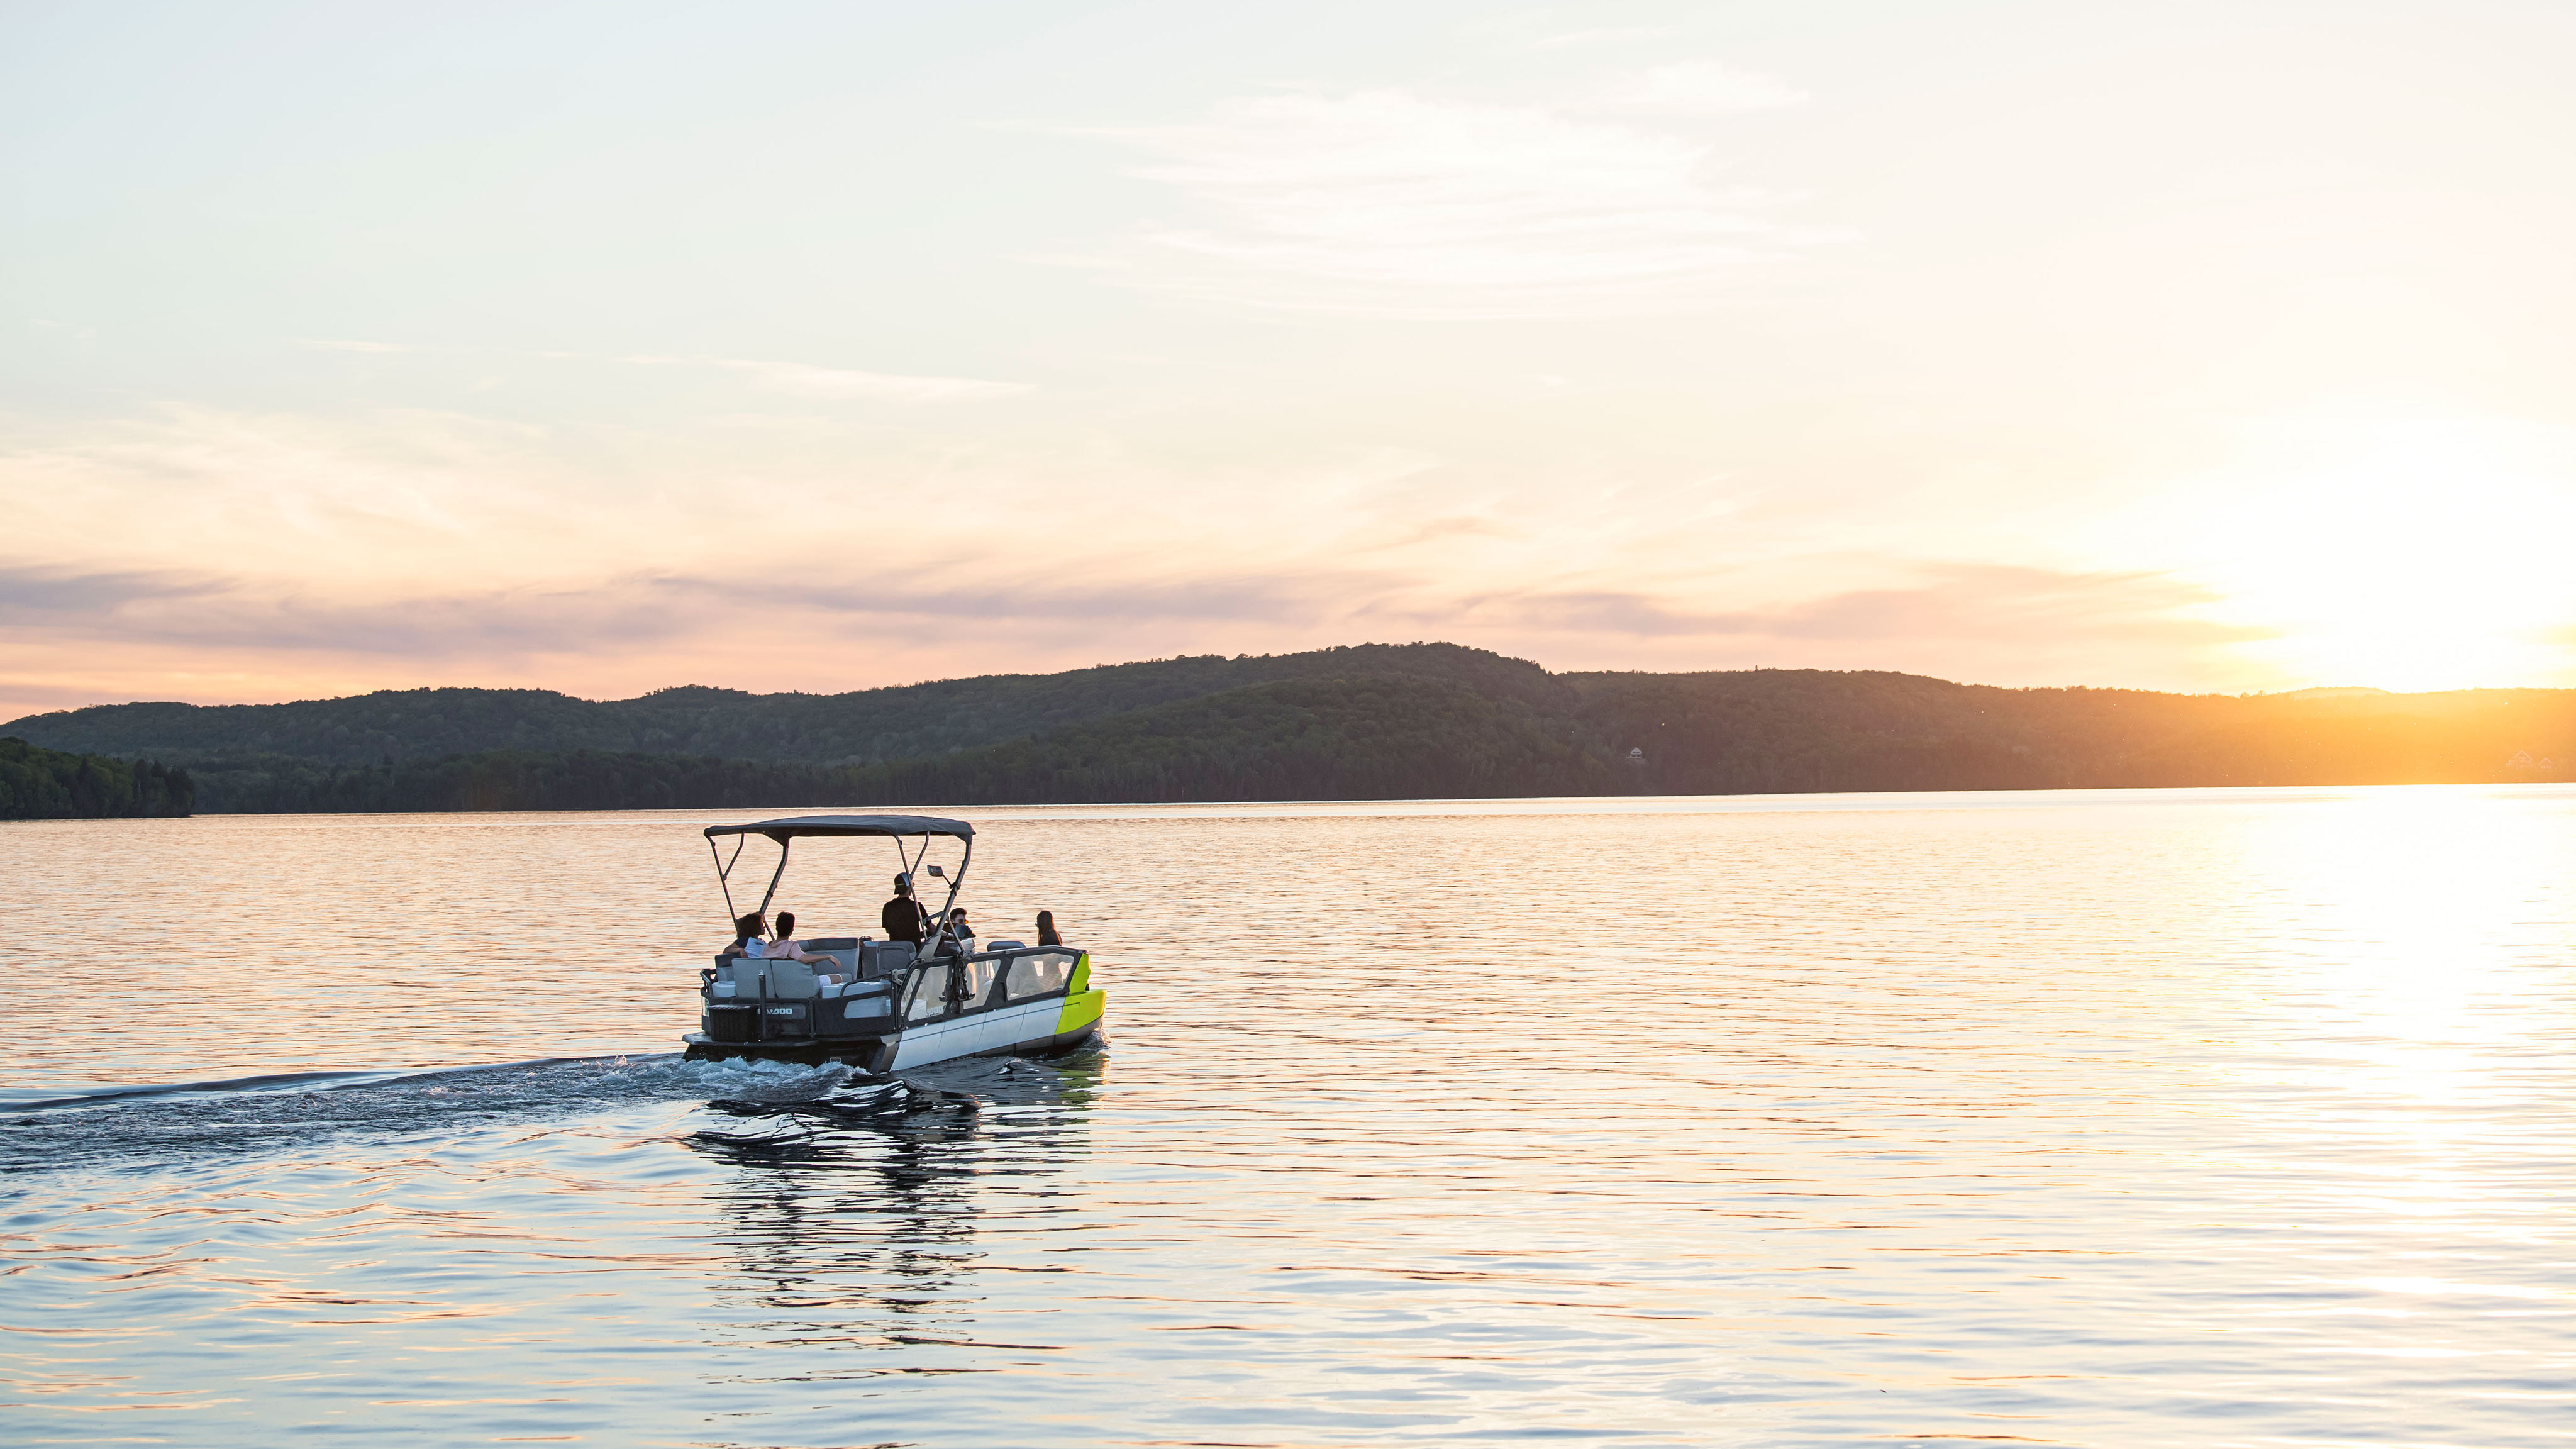 Sea-Doo Switch Sport riding at sunset